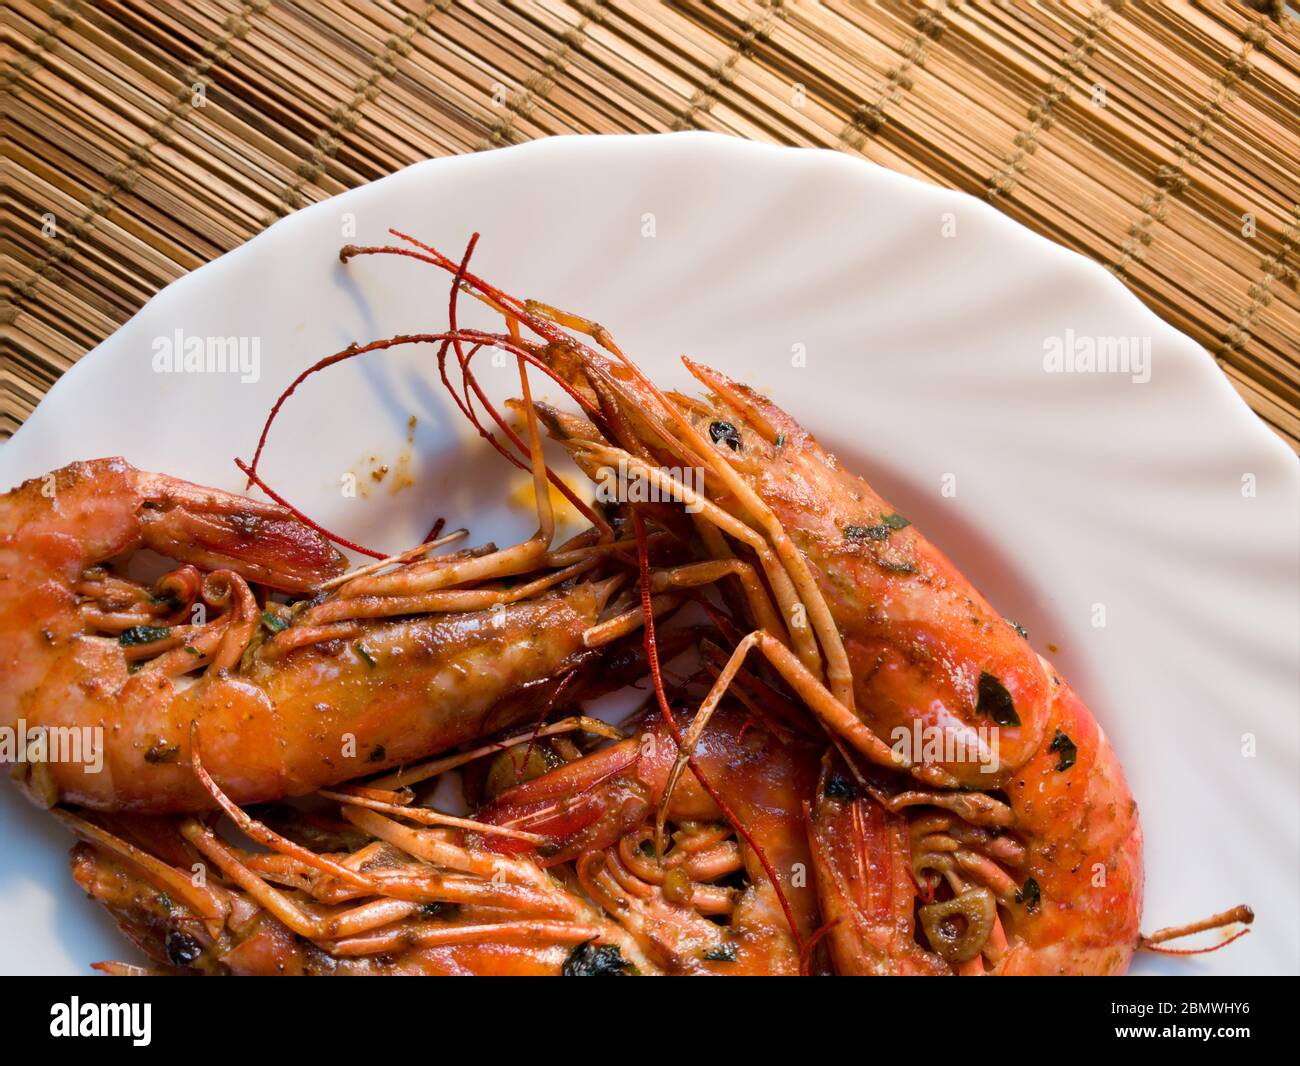 A fried lobster on a white plate, a straw lining under plate, garlic, close up Stock Photo